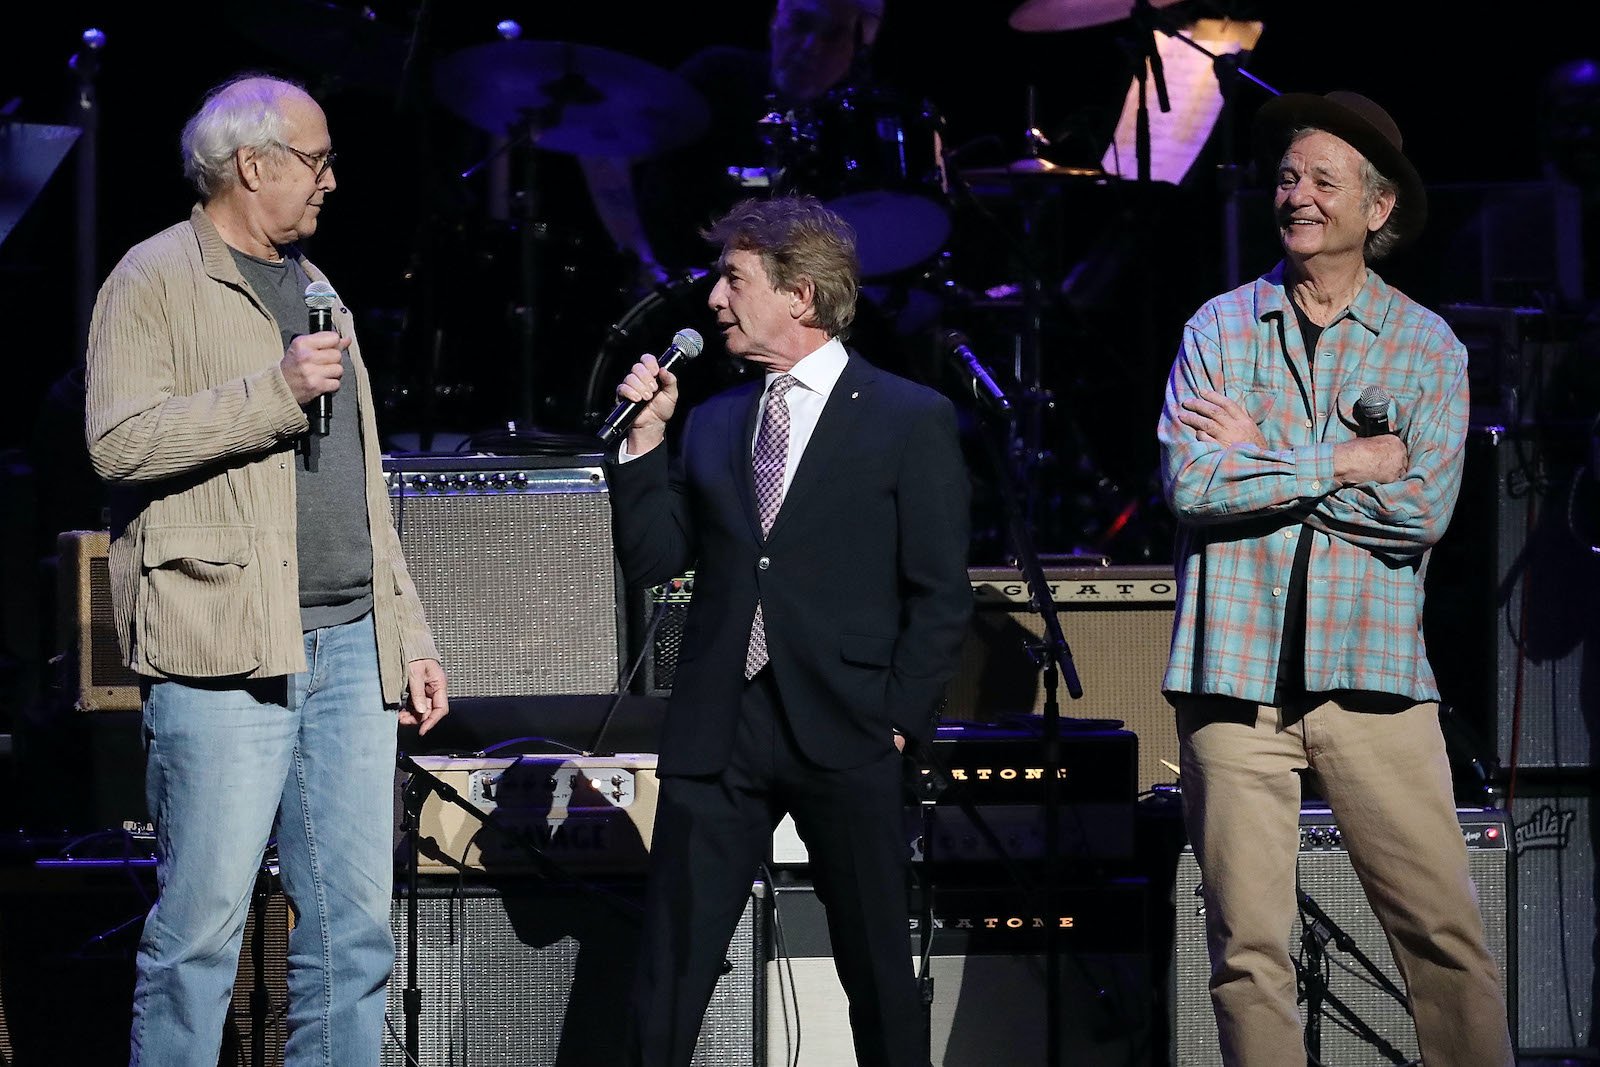 Chevy Chase, Martin Short, and Bill Murray performed in NYC